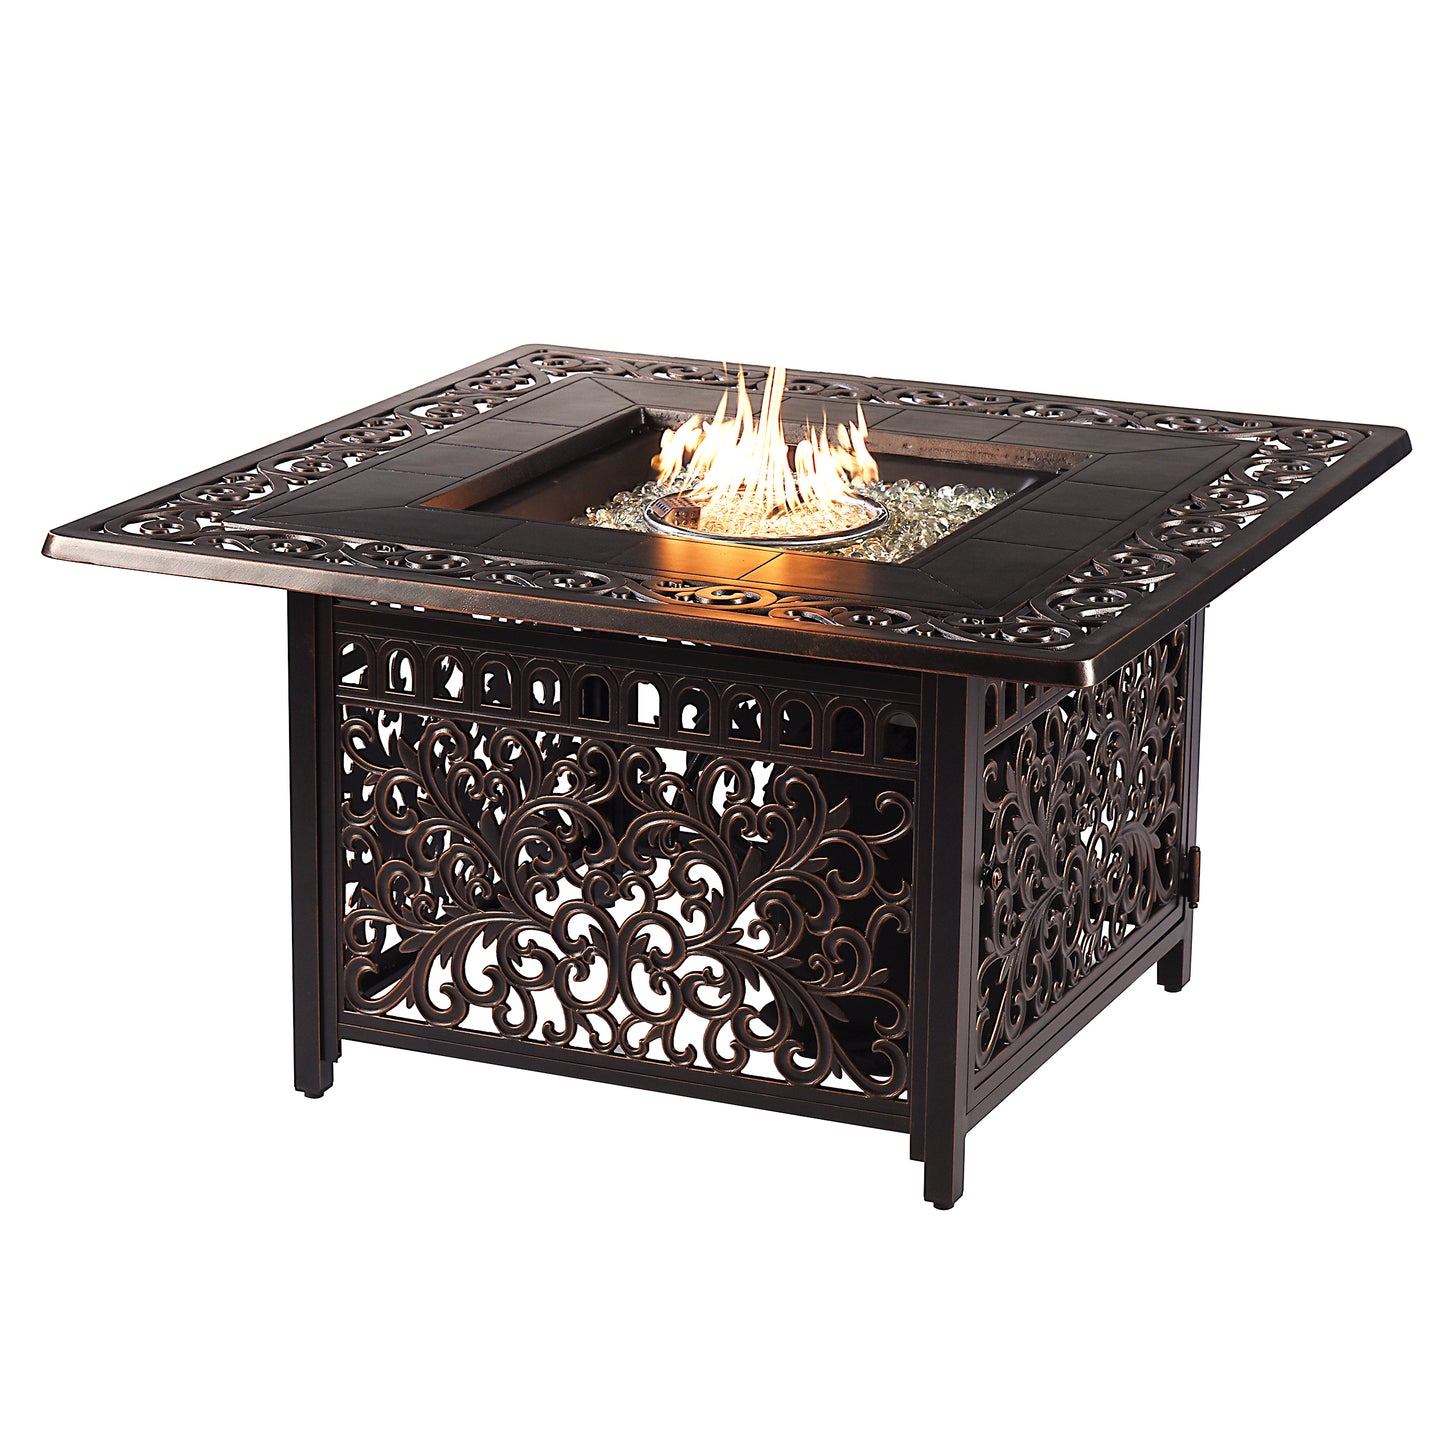 Aluminum 42-in Square Propane Fire Table with Beads, Covers and Lid